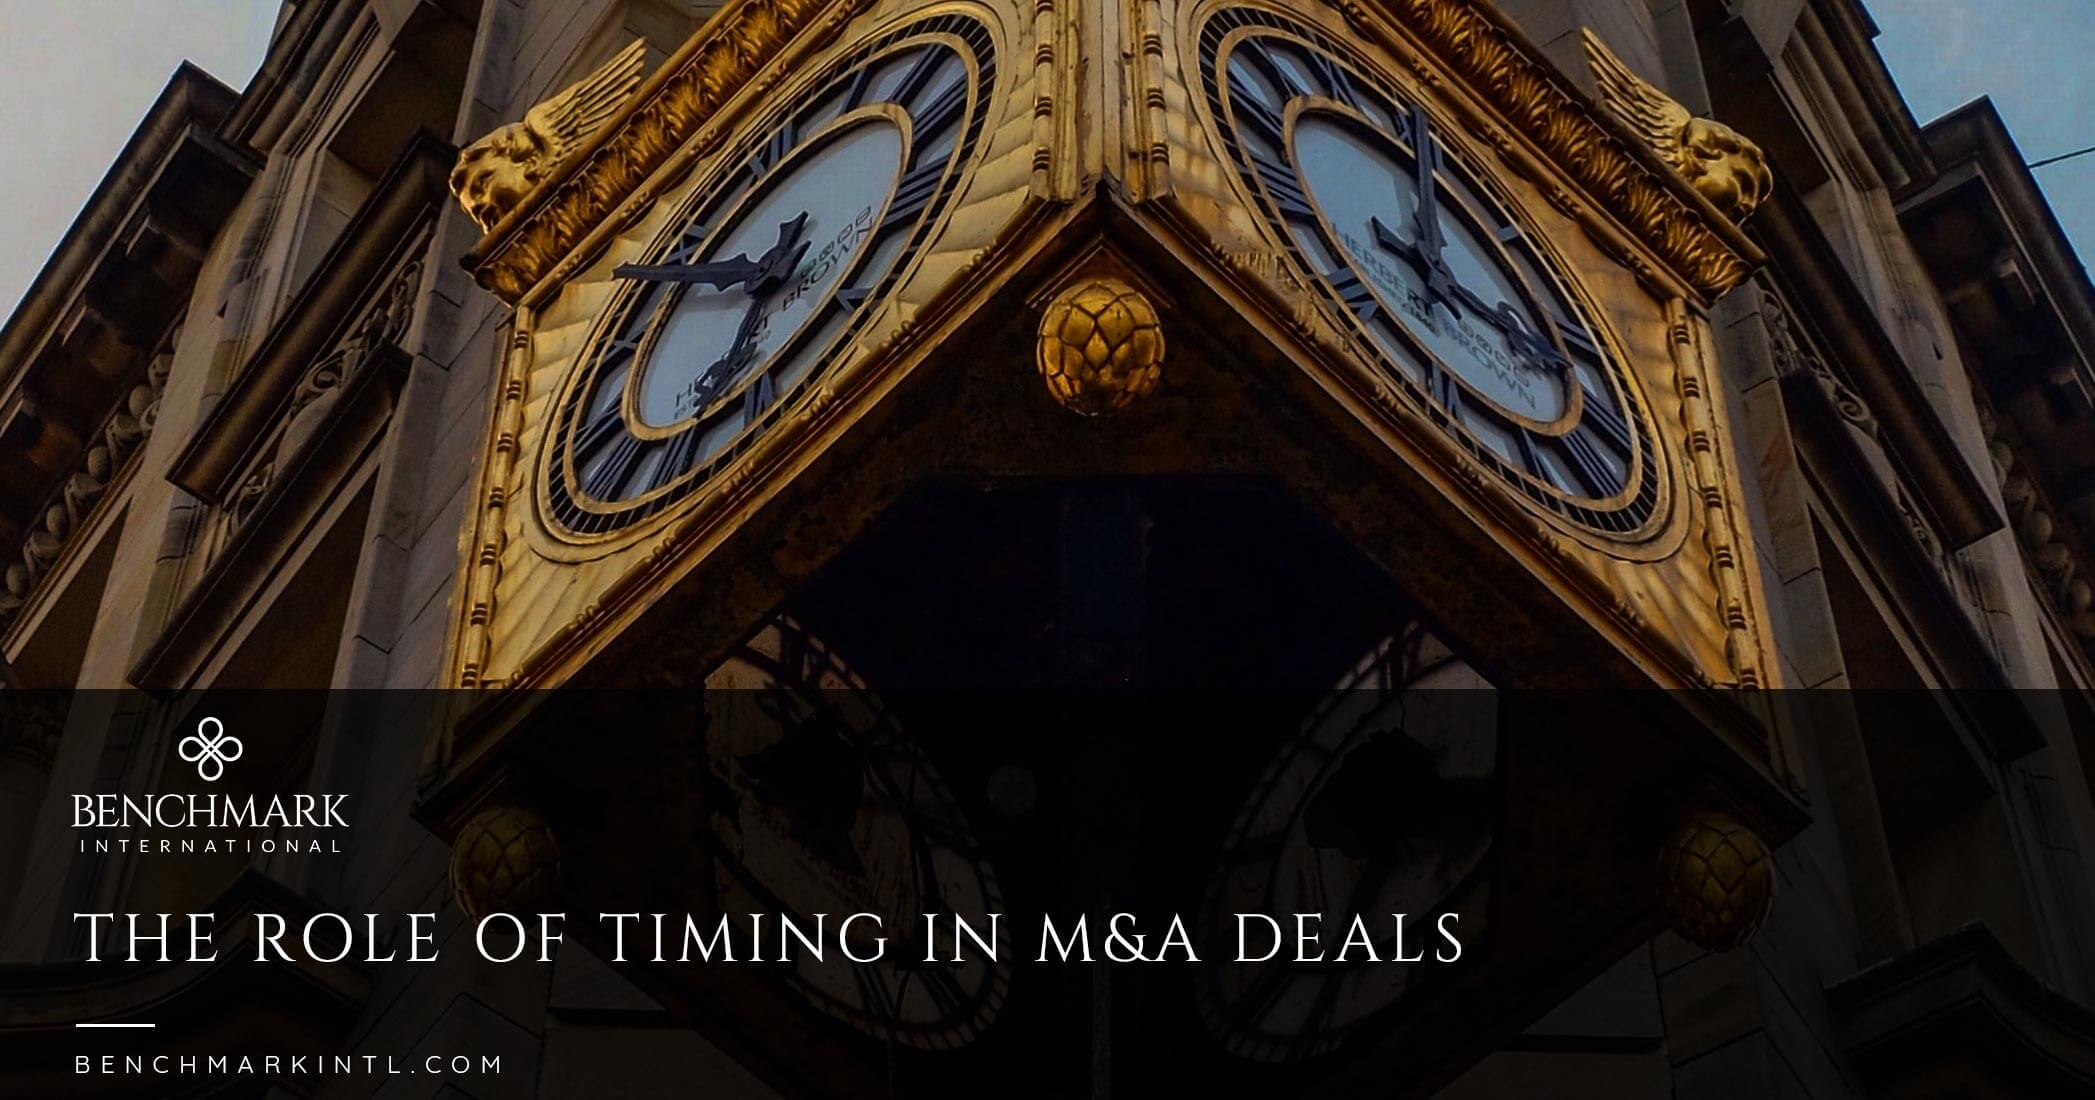 The Role Of Timing In M&A Deals